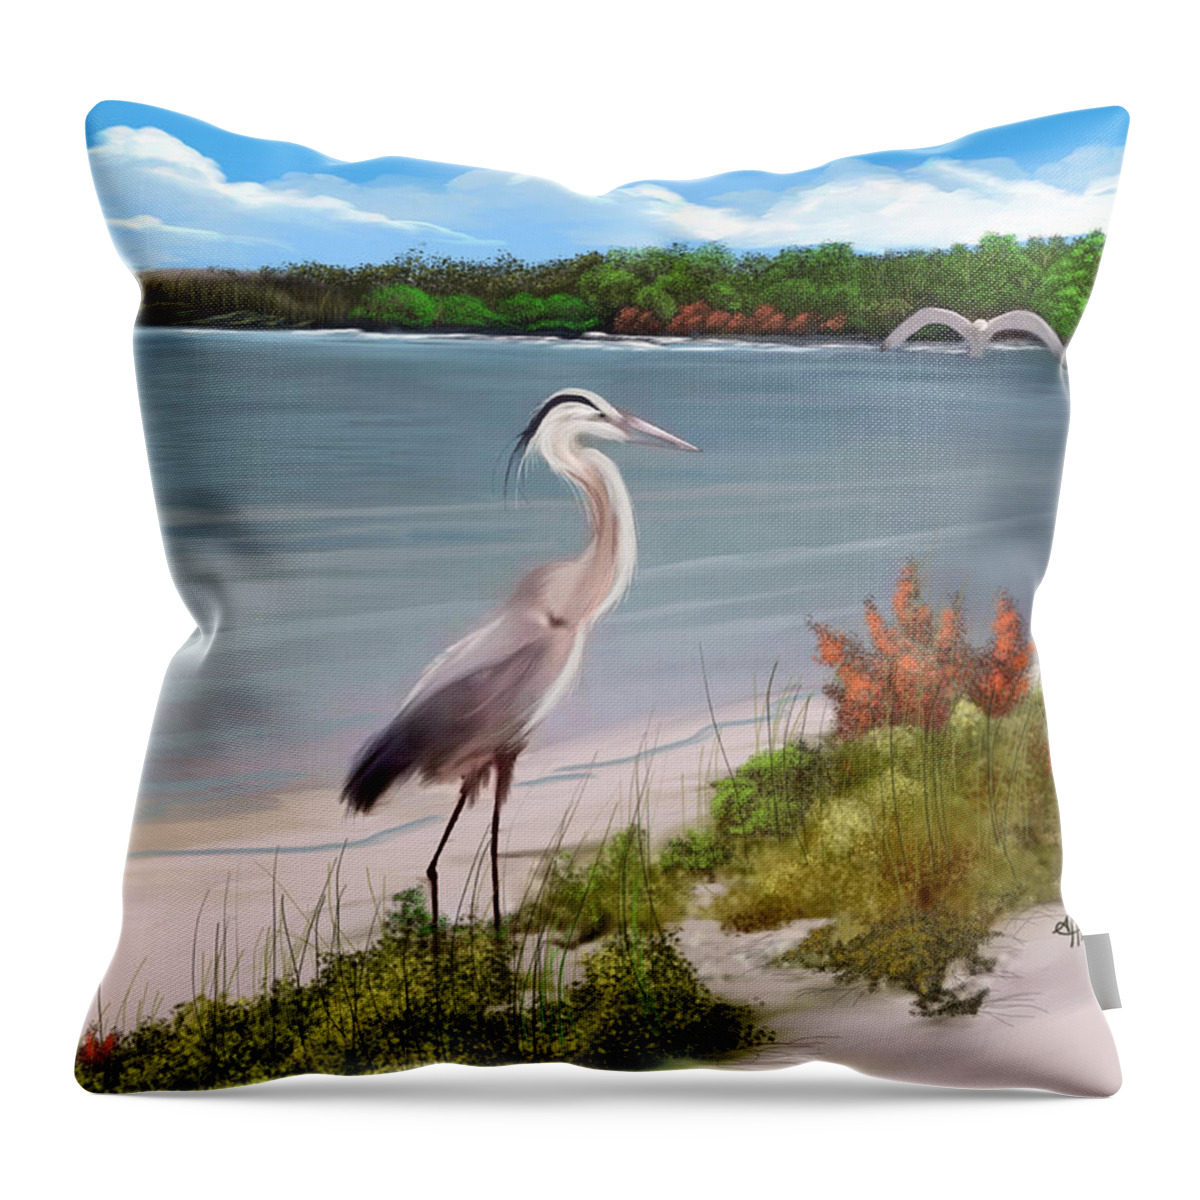 Anthony Fishburne Throw Pillow featuring the digital art Crane by the sea shore by Anthony Fishburne